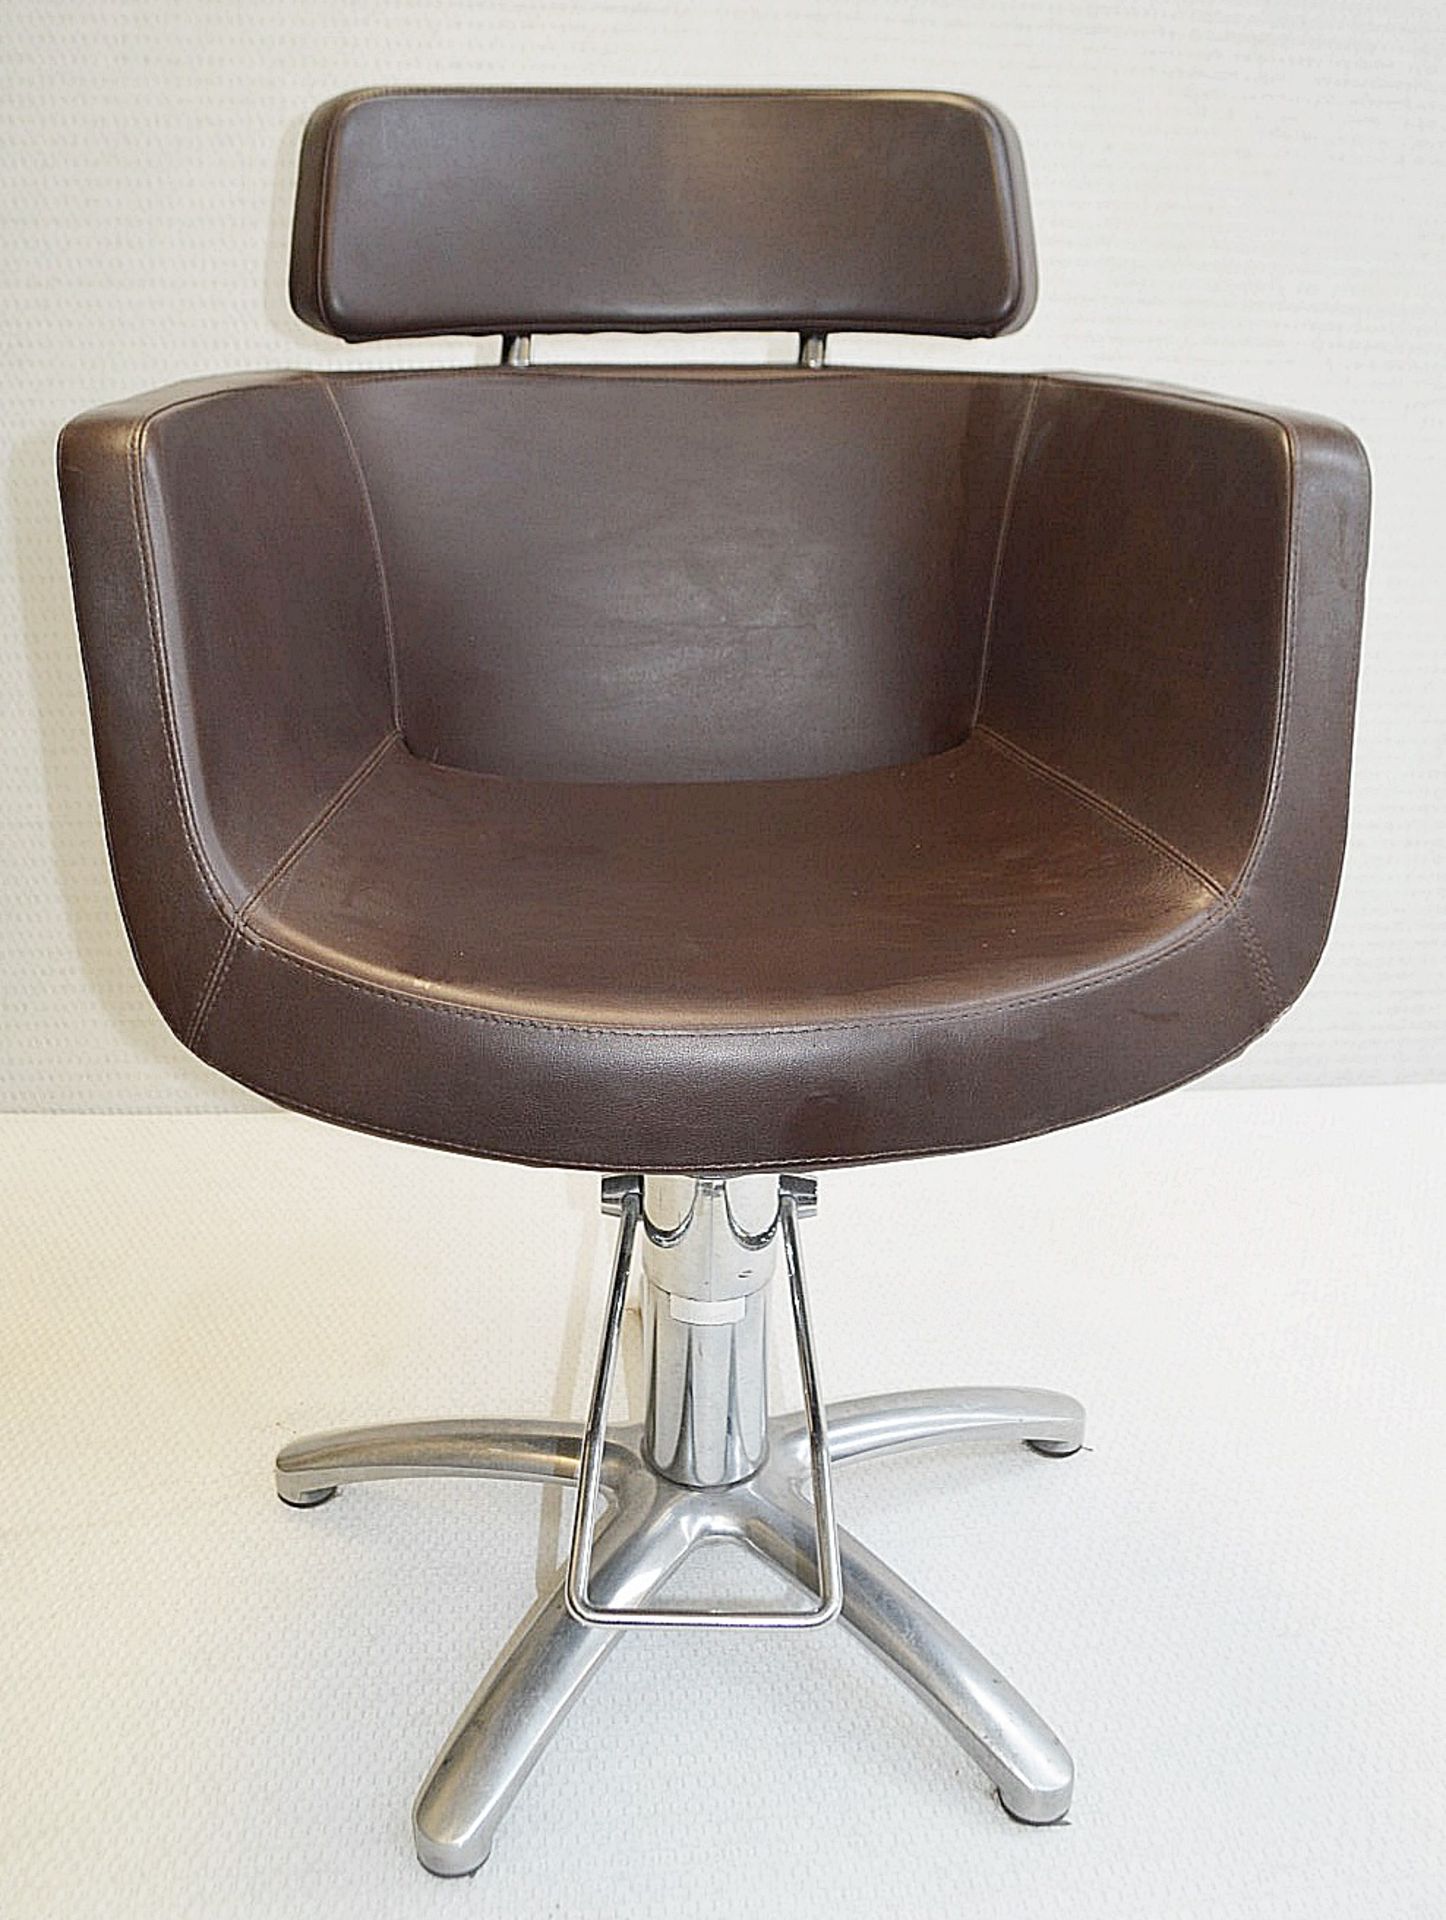 5 x Malet Branded Professional Hairdressing Salon Swivel Chairs In Brown - Includes 4 x Foot Rests - Image 6 of 7